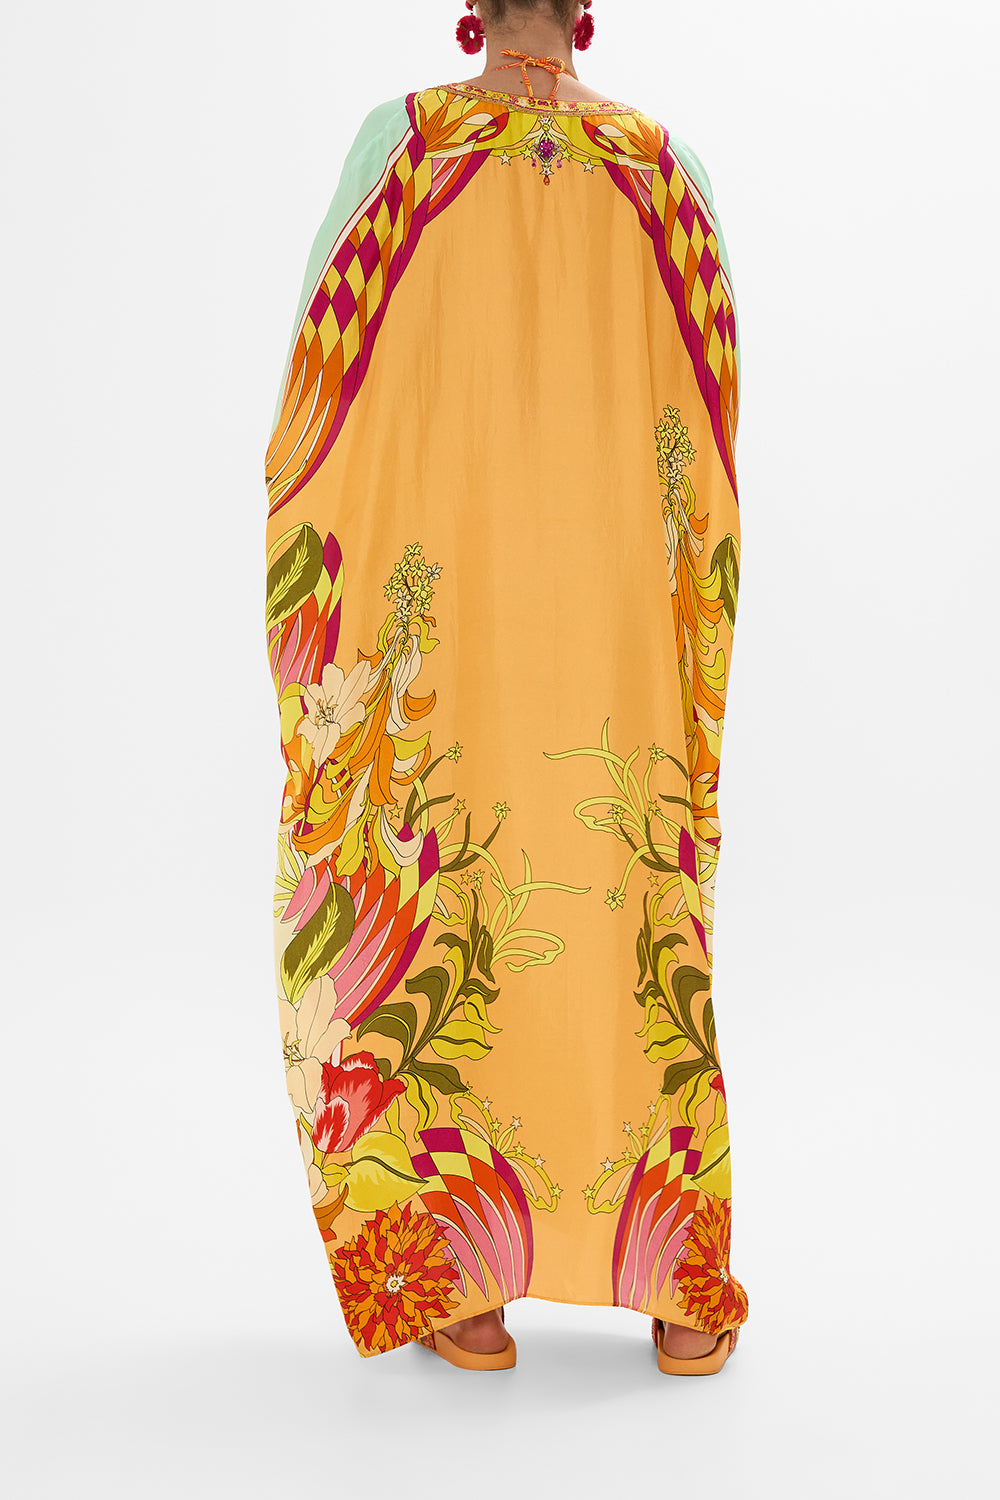 CAMILLA Floral Button Through Batwing Kaftan in The Flower Child Society